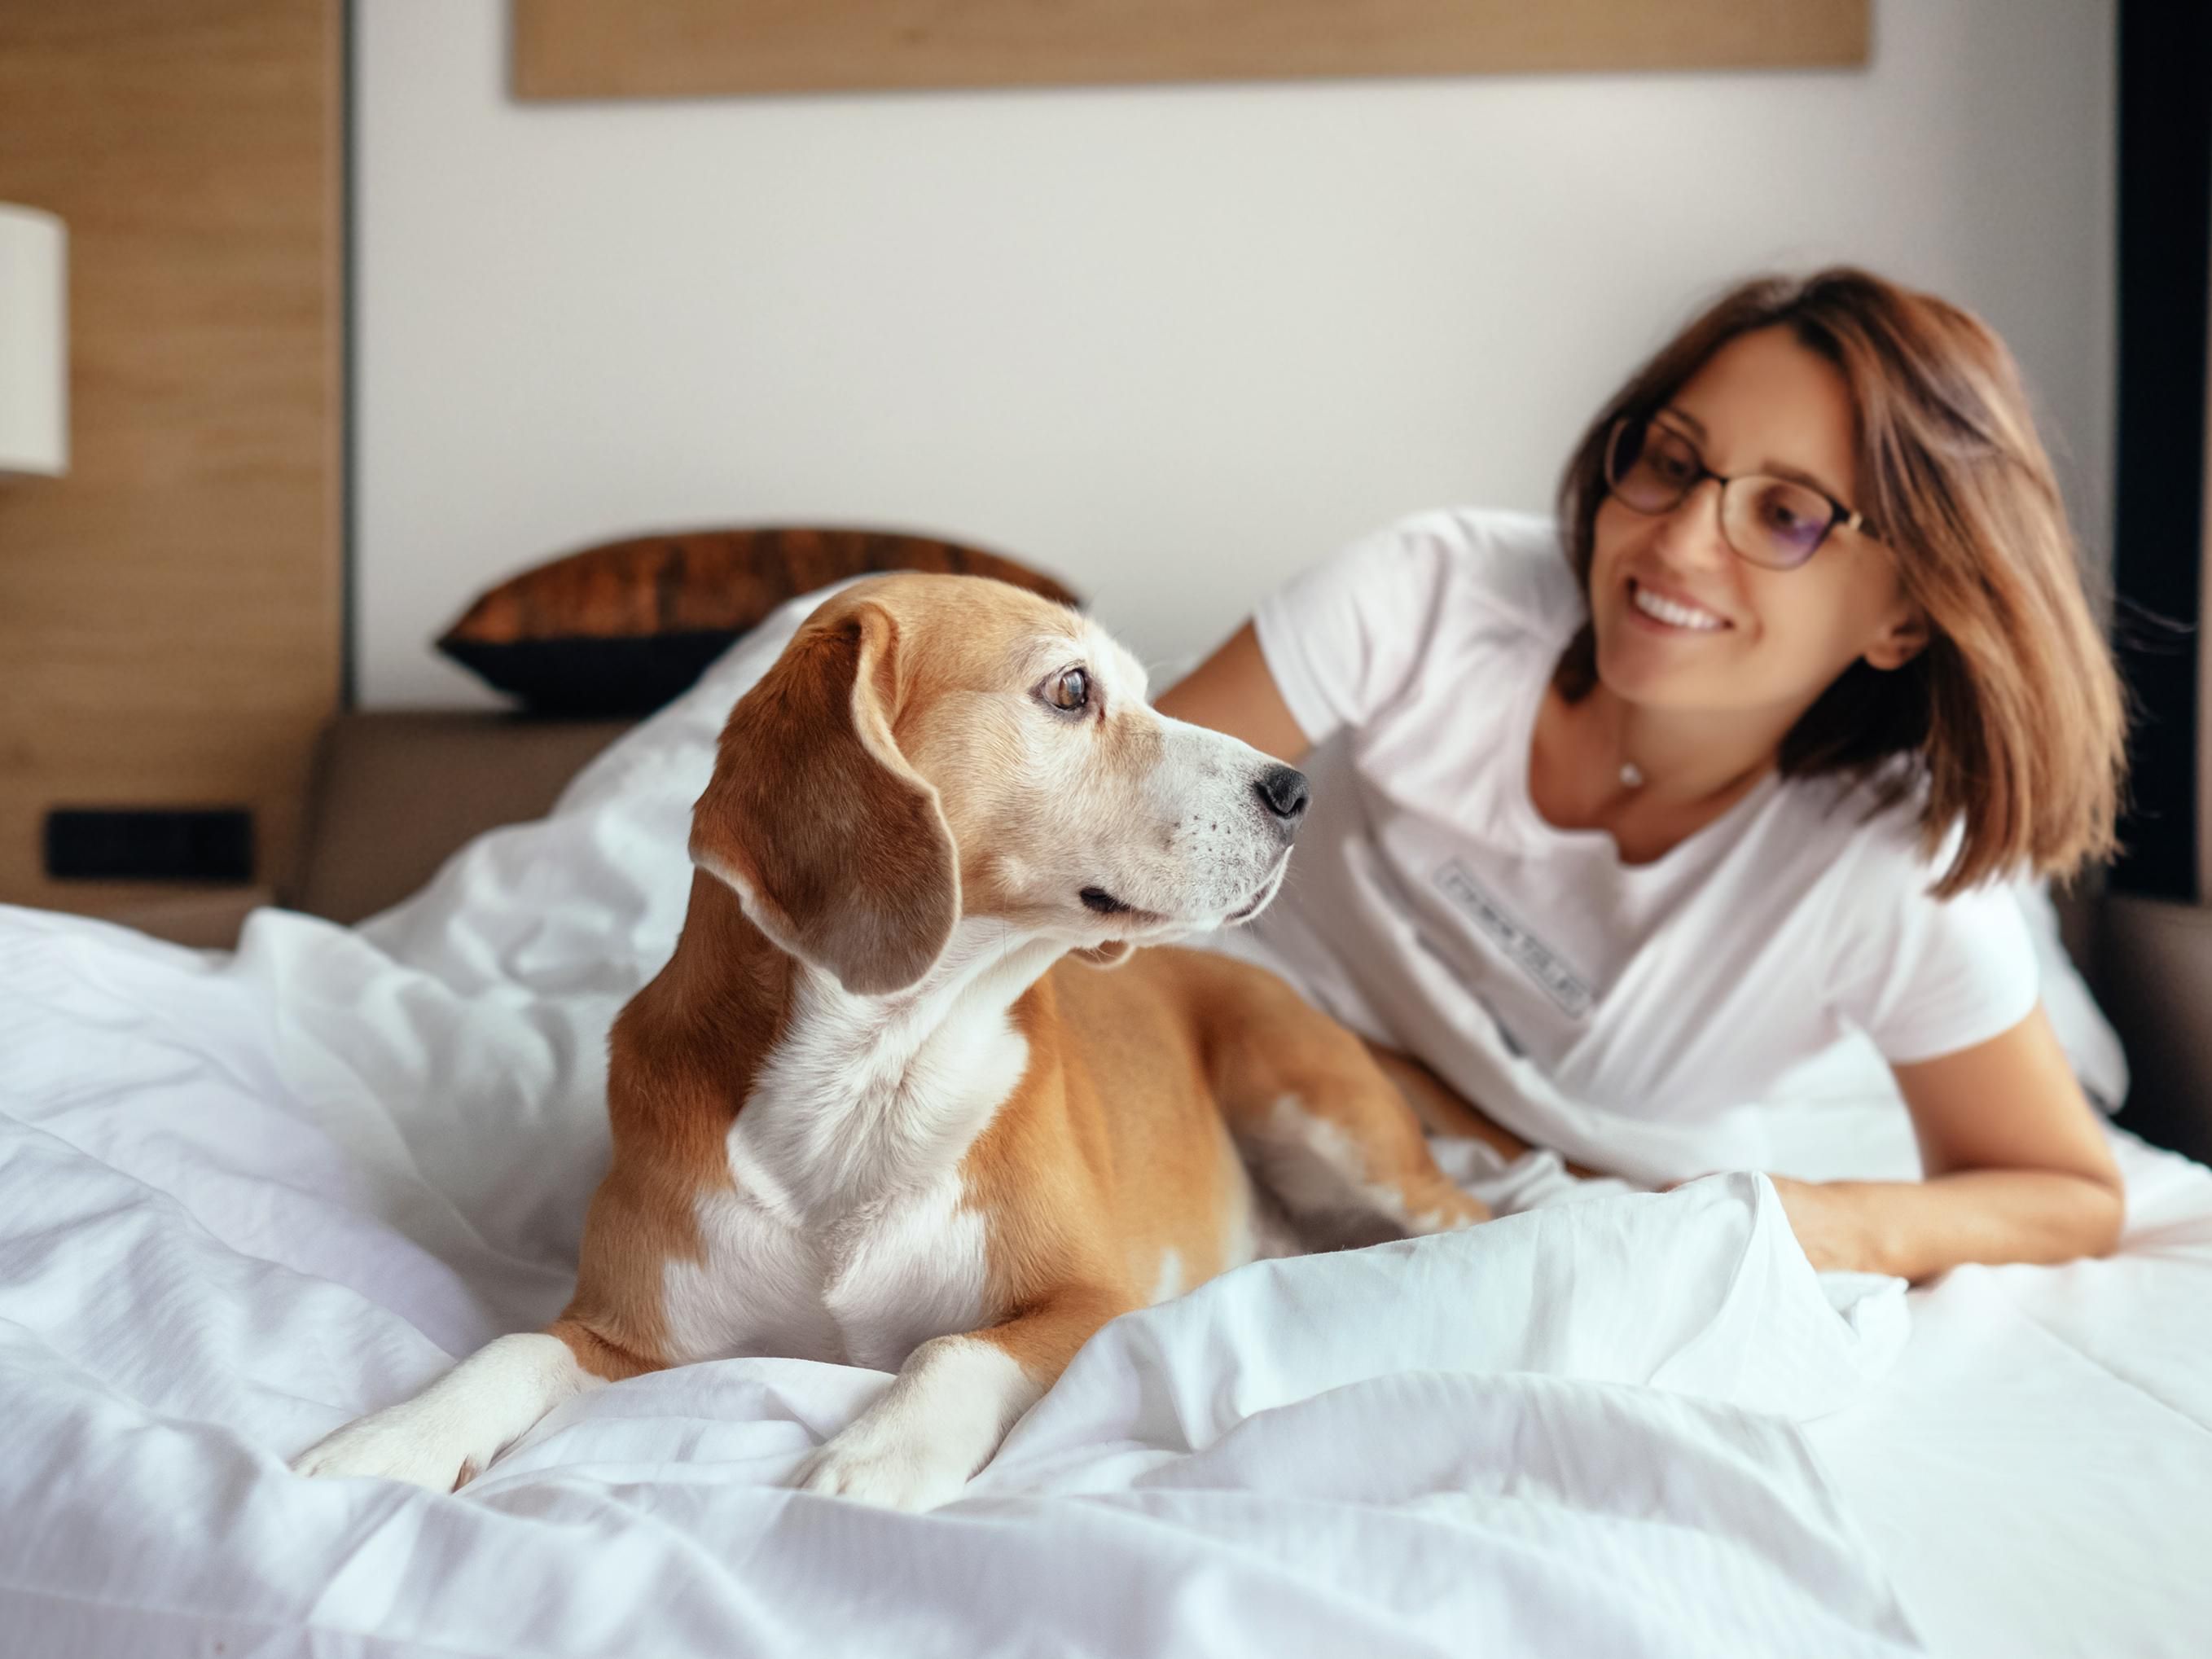 It can be hard to find a pet-friendly hotel room in NYC, but we’ve got you covered. Just let us know you’re bringing your pet with you and get ready for a pawsome stay. Contact us for our pet policy and information.